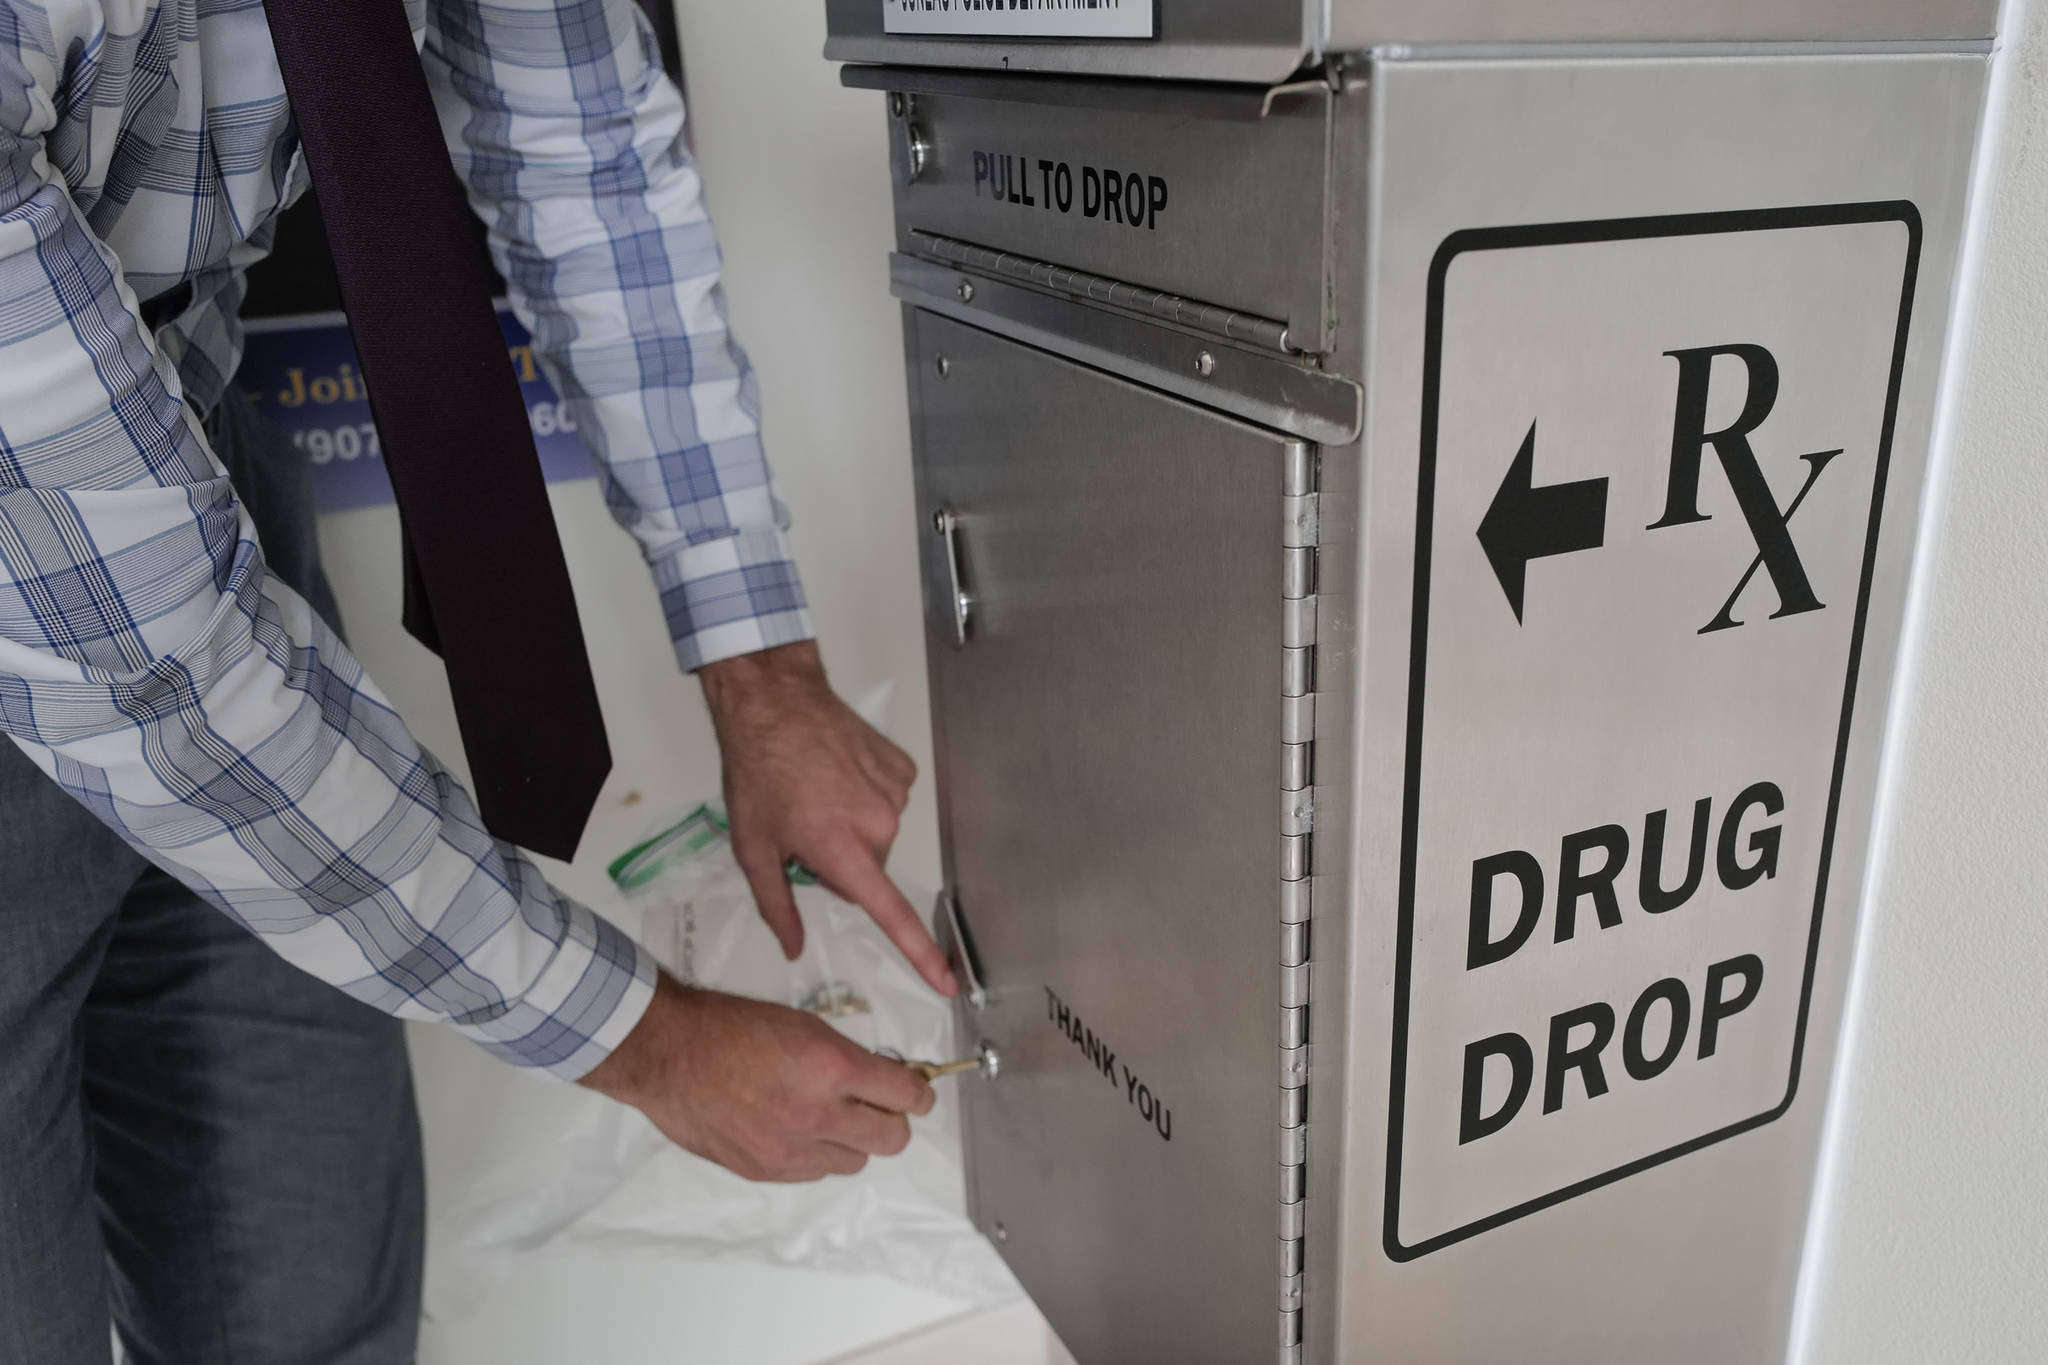 Lt. Jeremy Weske opens a drug drop box in the lobby of the Juneau Police Department on Thursday, Sept. 26, 2019. The drop box gives residents a safe place to disposed of their unused prescription narcotics. (Michael Penn | Juneau Empire)